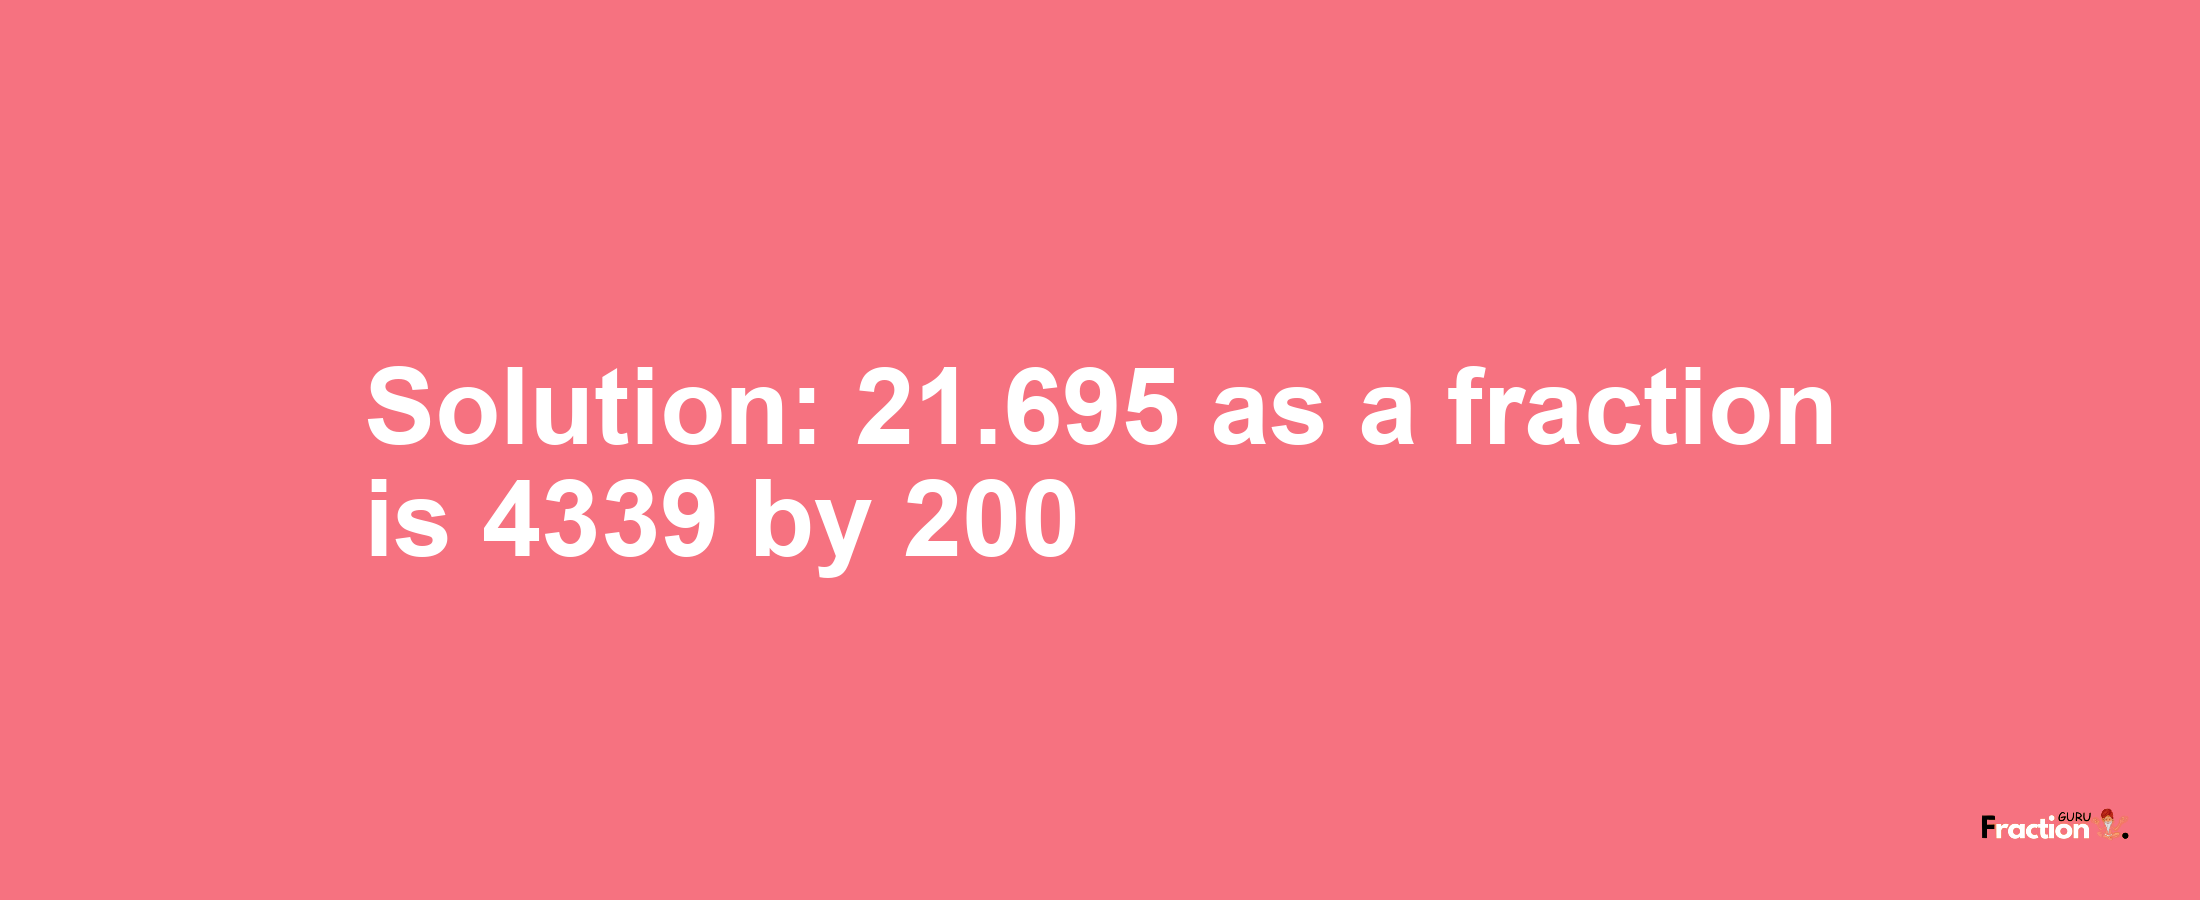 Solution:21.695 as a fraction is 4339/200